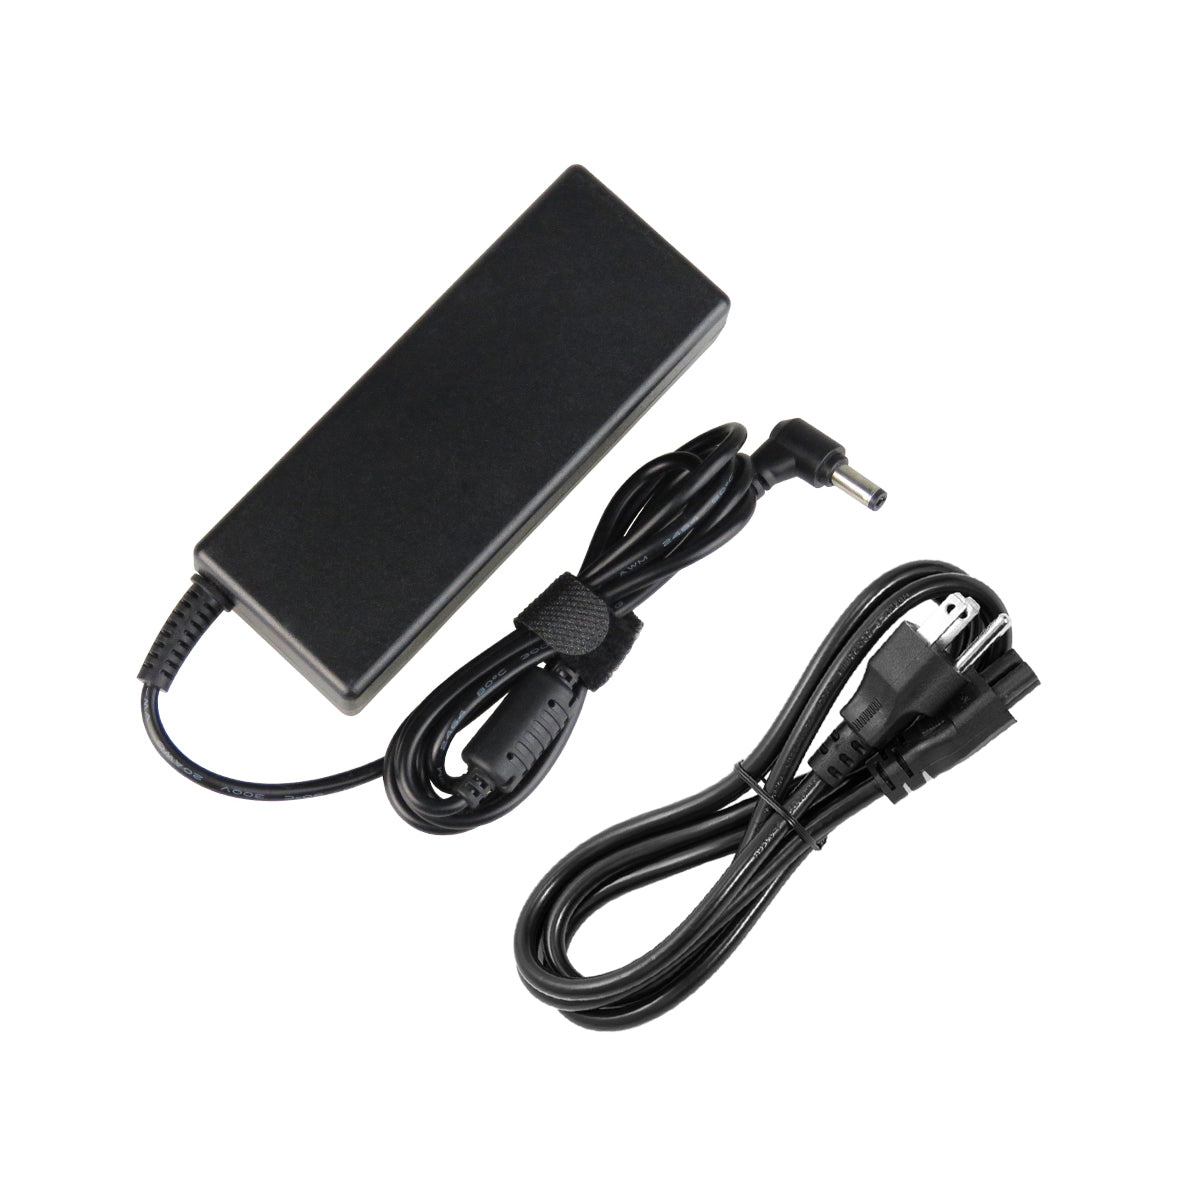 AC Adapter Charger for Toshiba Satellite c55-a5281 Notebook.